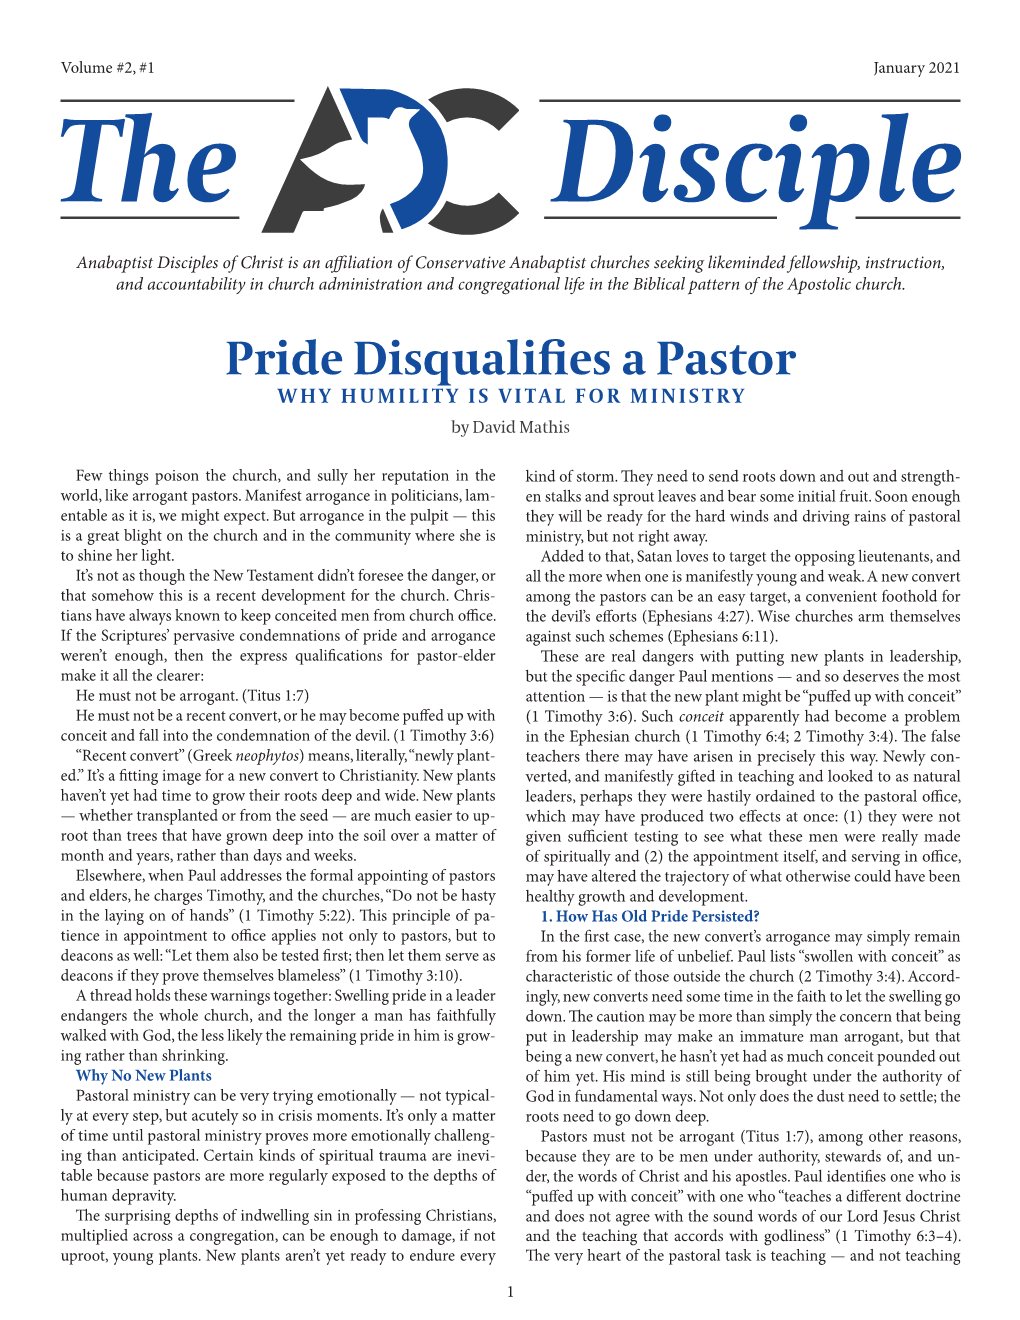 Pride Disqualifies a Pastor WHY HUMILITY IS VITAL for MINISTRY by David Mathis